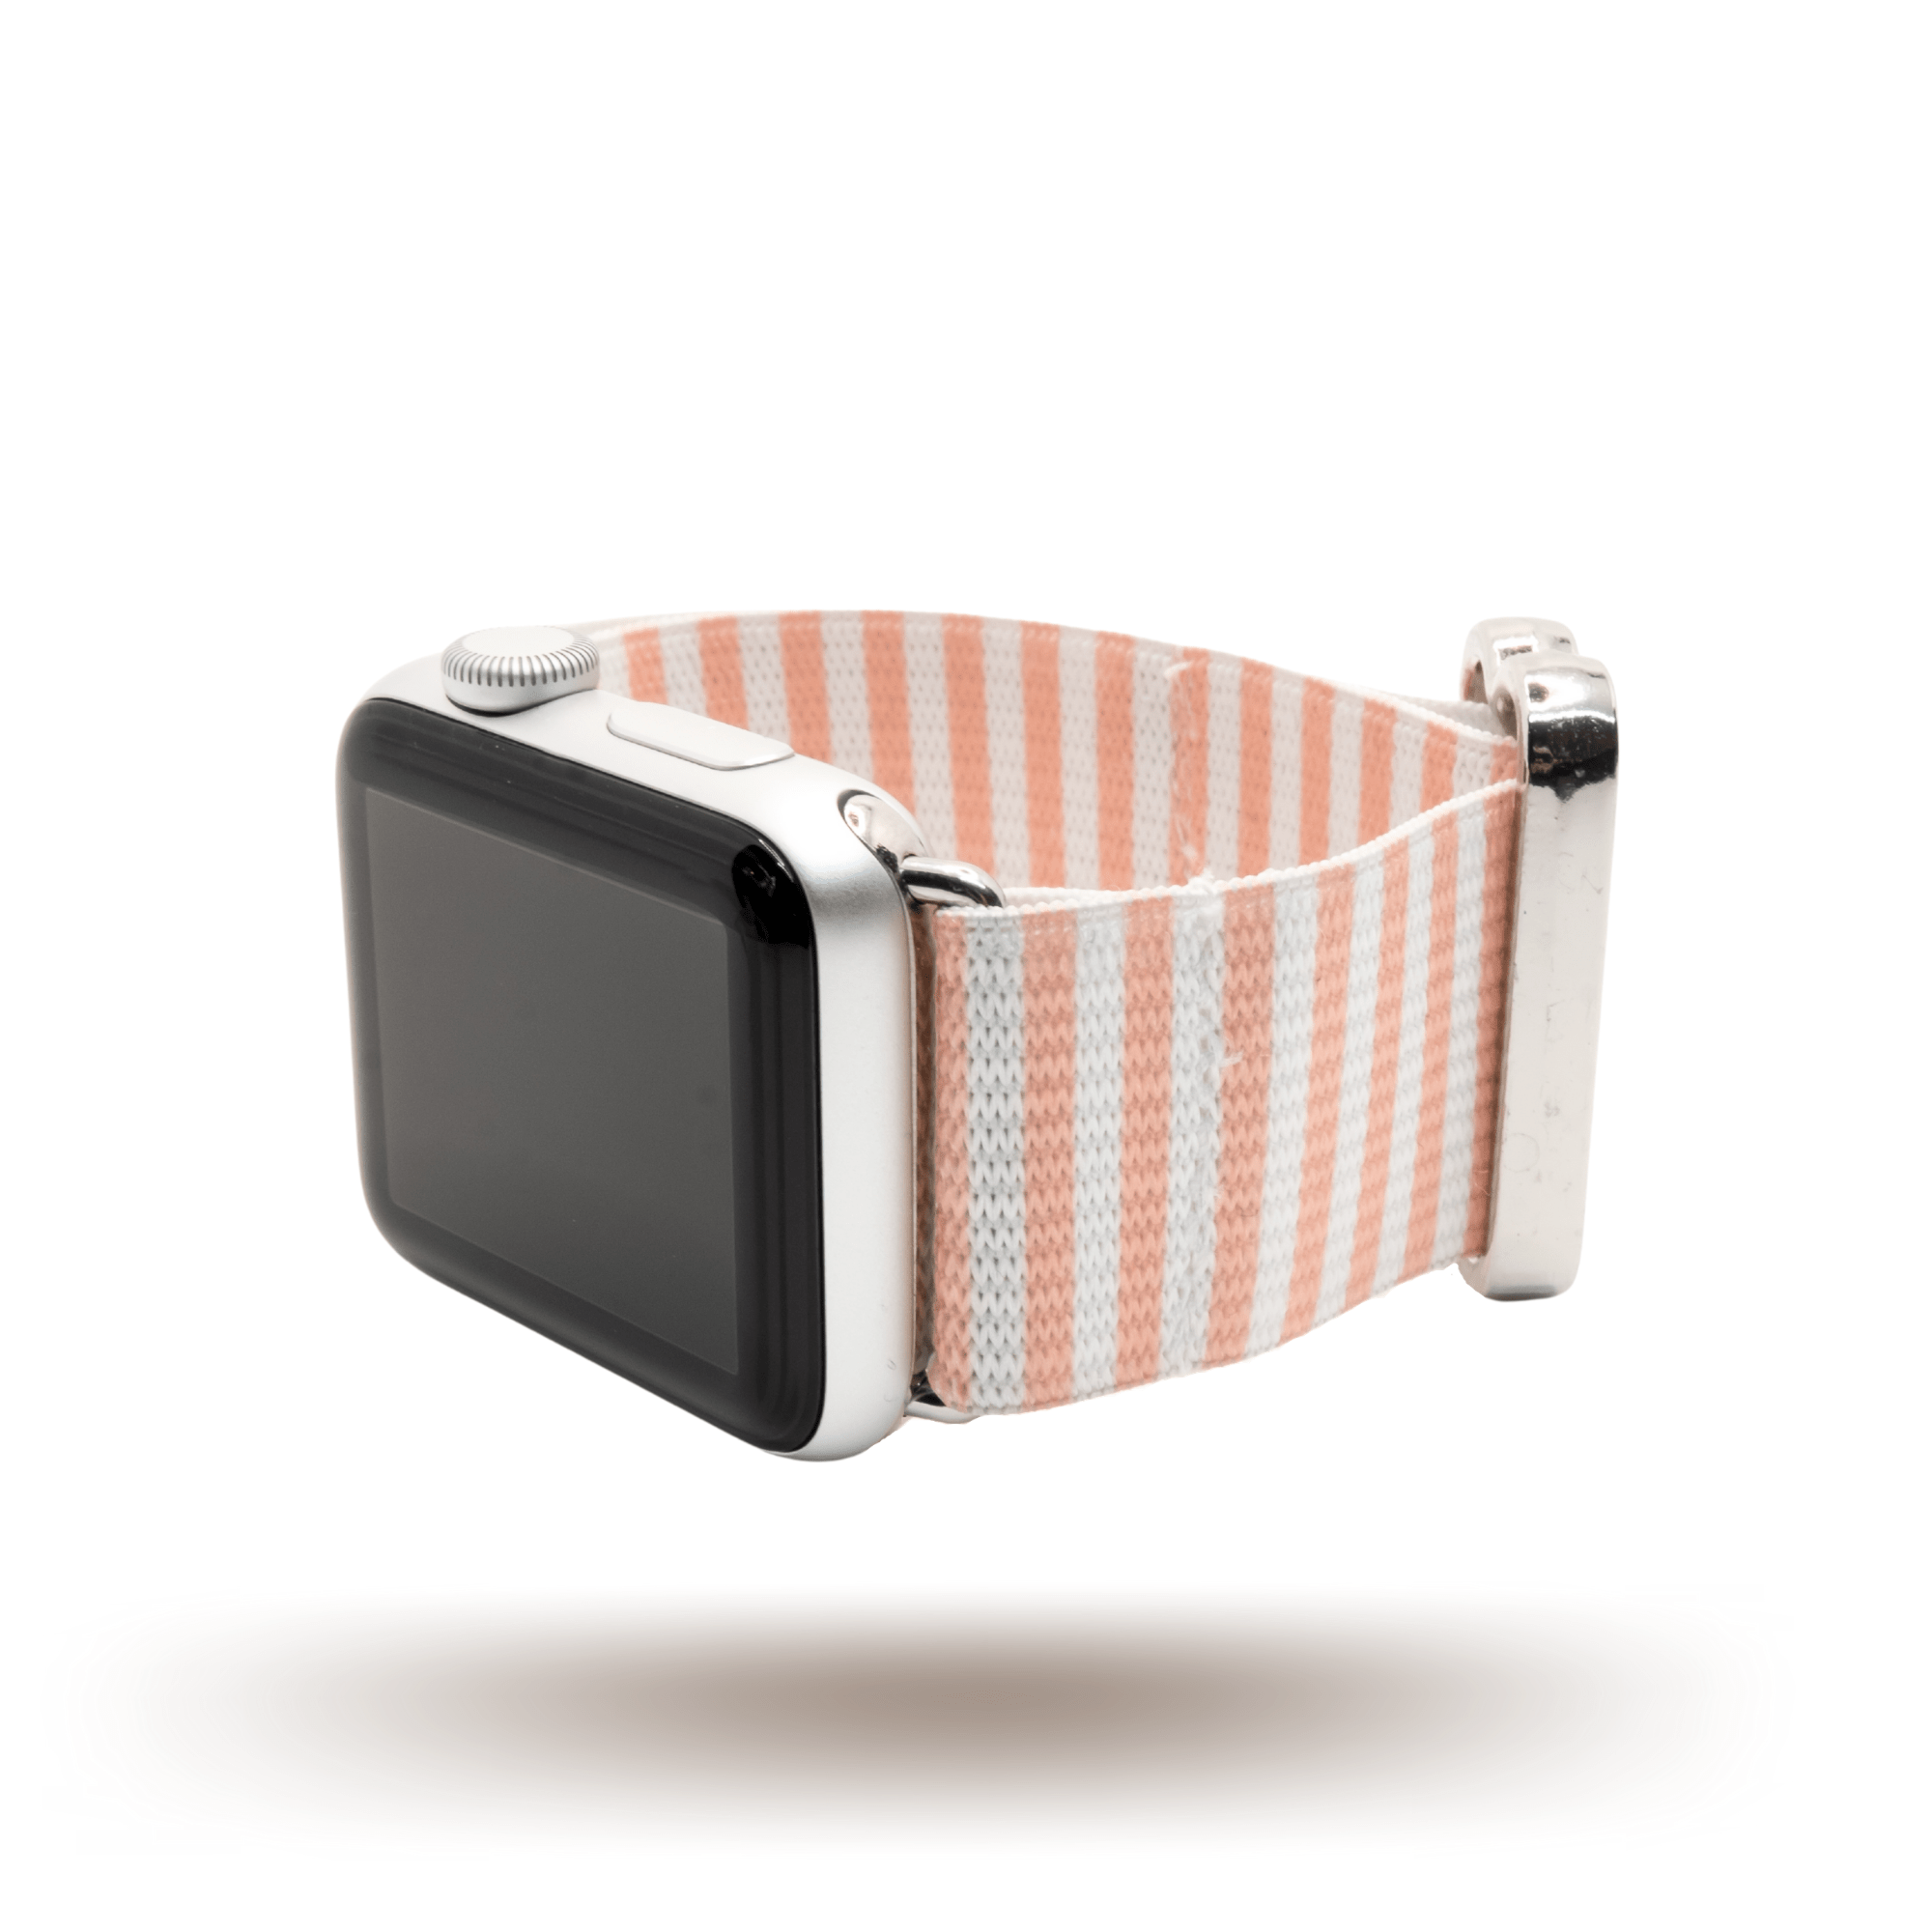 Peach Deltas Adjustable Elastic Band for Apple Watch, Fitbit